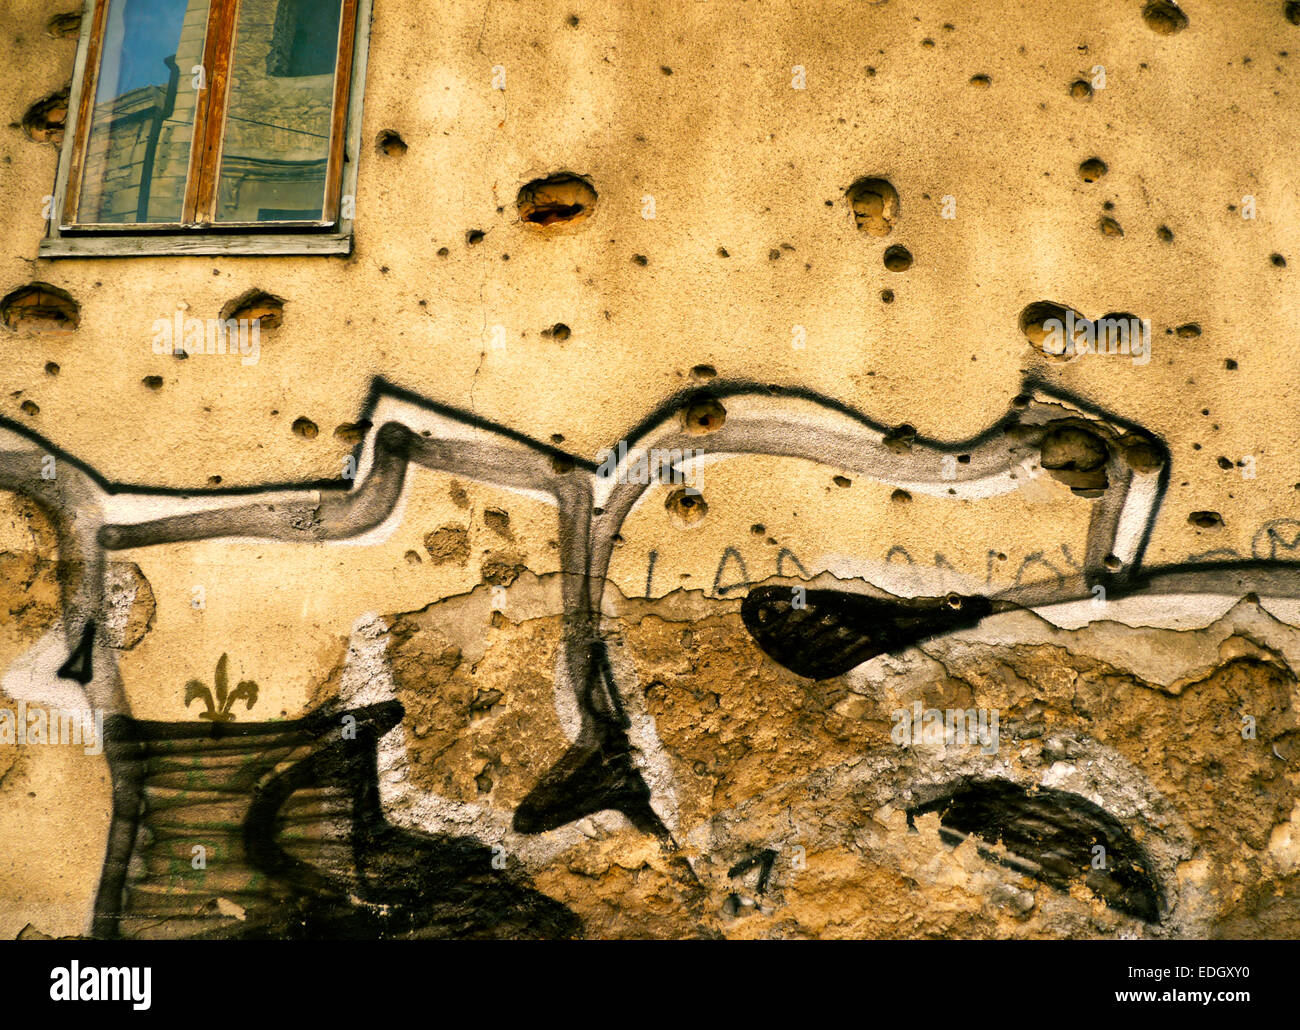 Damage from the war in Bosnia visible over fifteen years after the conflict ended. Mostar, Bosnia and Herzegovina, 2012. Stock Photo